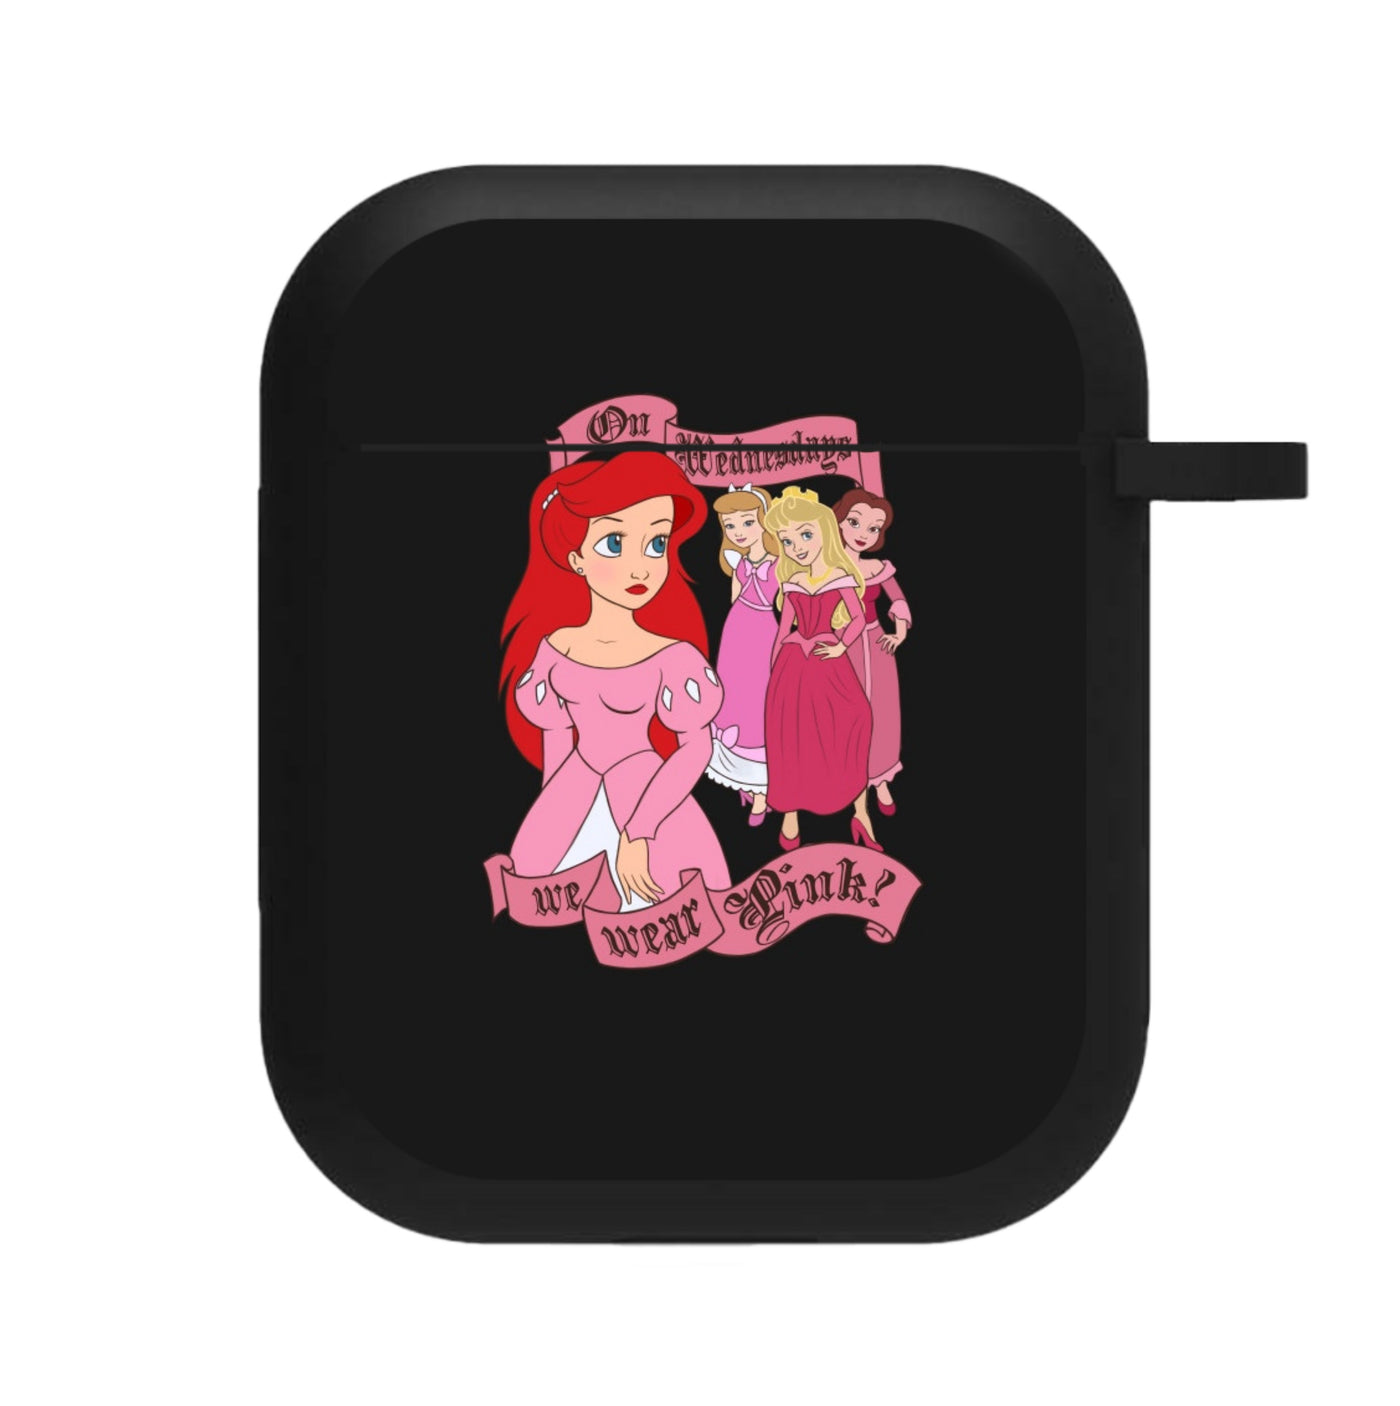 On Wednesdays We Wear Pink - Princesses - Mean Girls AirPods Case